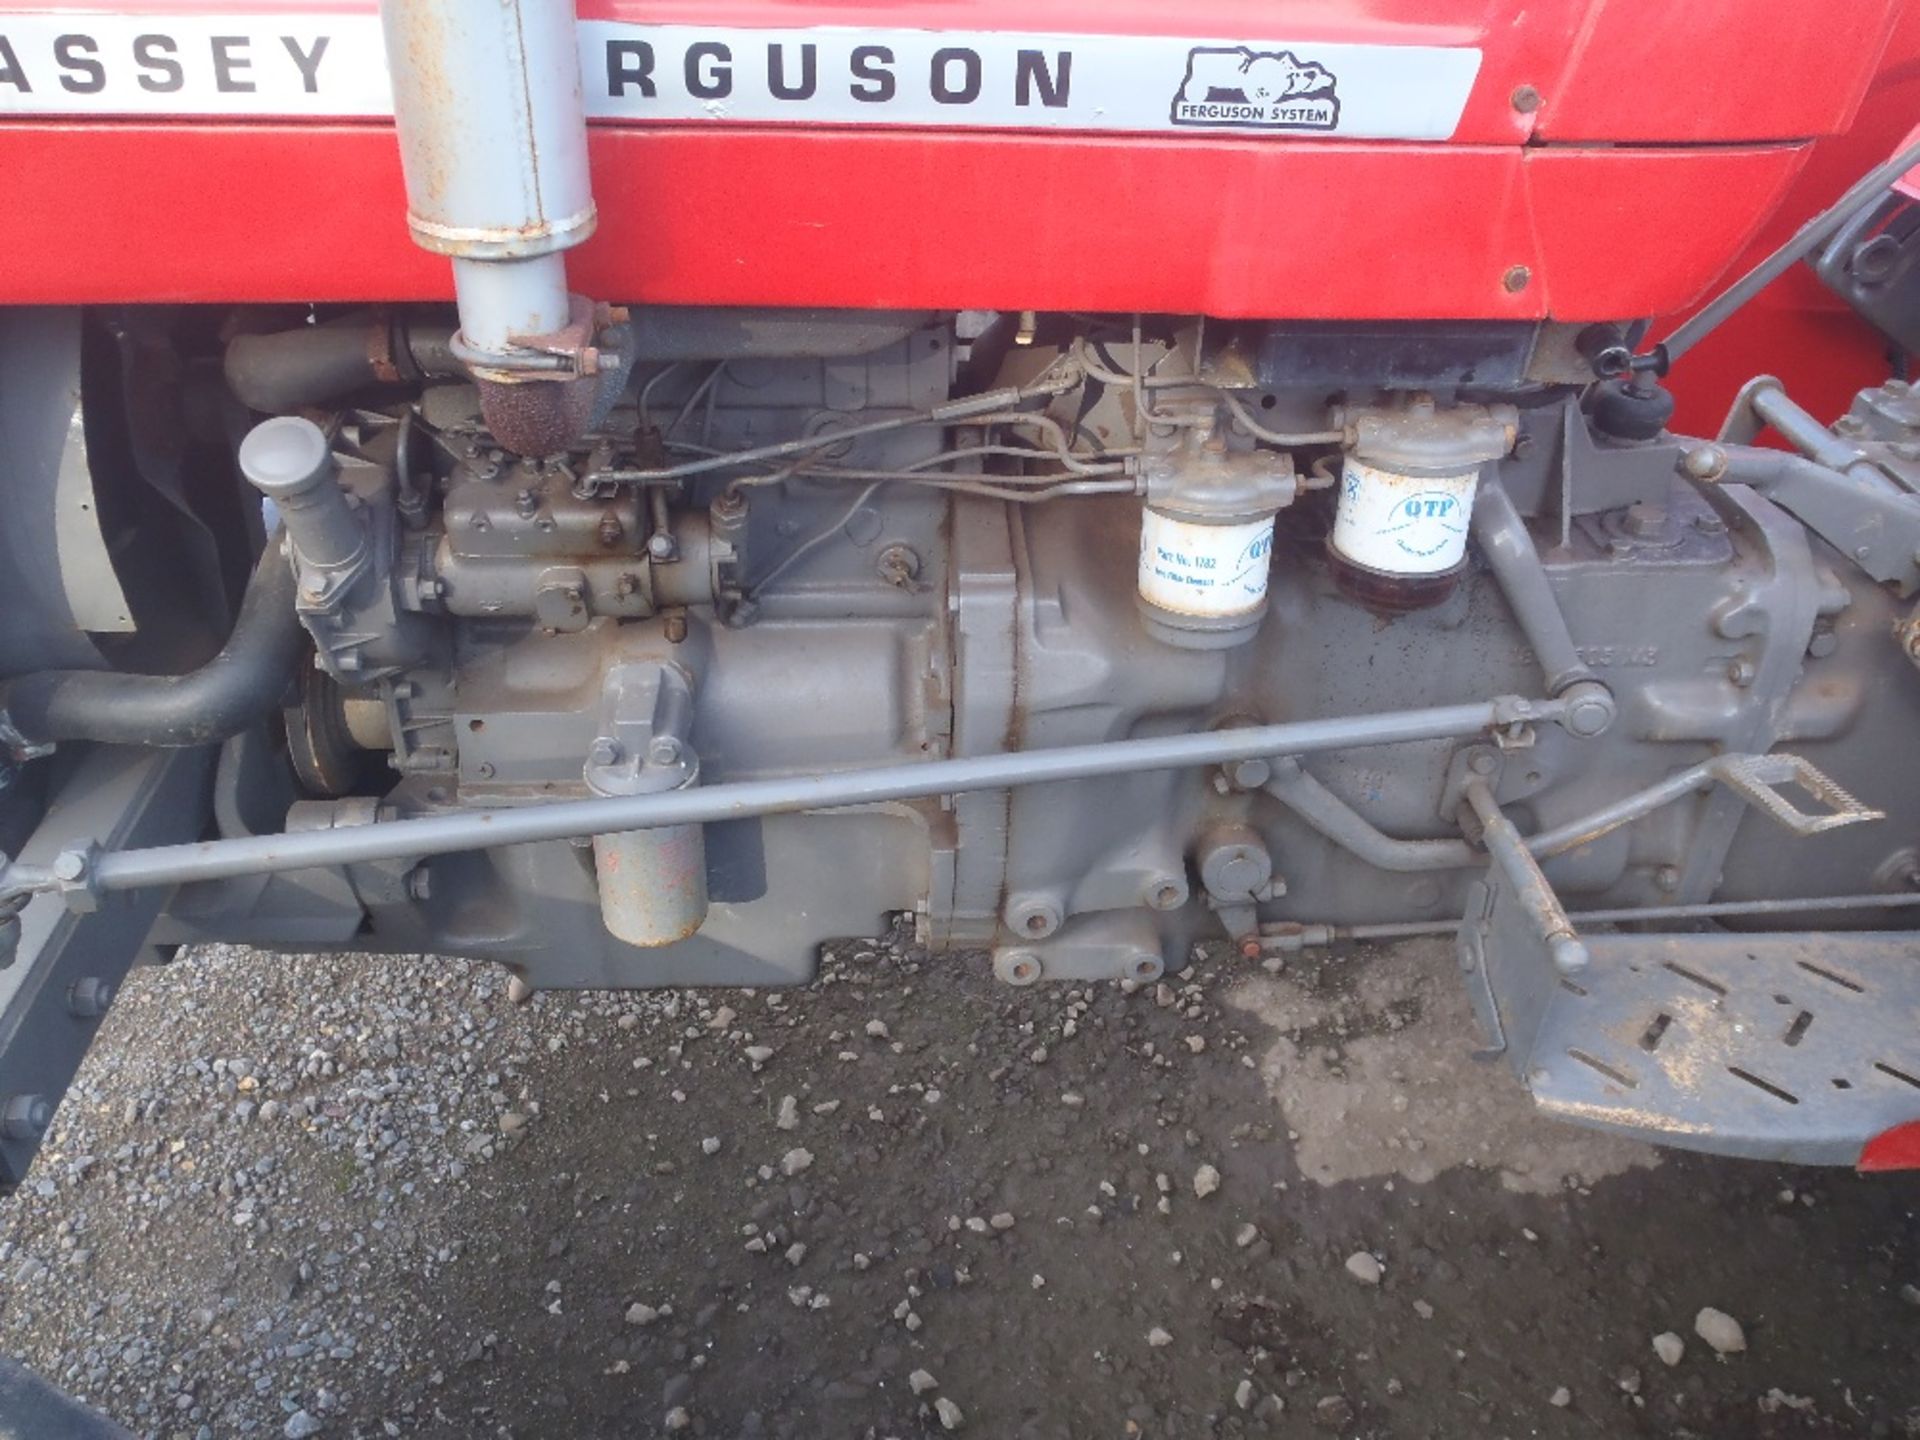 1976 Massey Ferguson 135 3 Cylinder Diesel Tractor. Goodyear Tyres, Long PTO, Cat 2 Lift Arms & Pick - Image 6 of 7